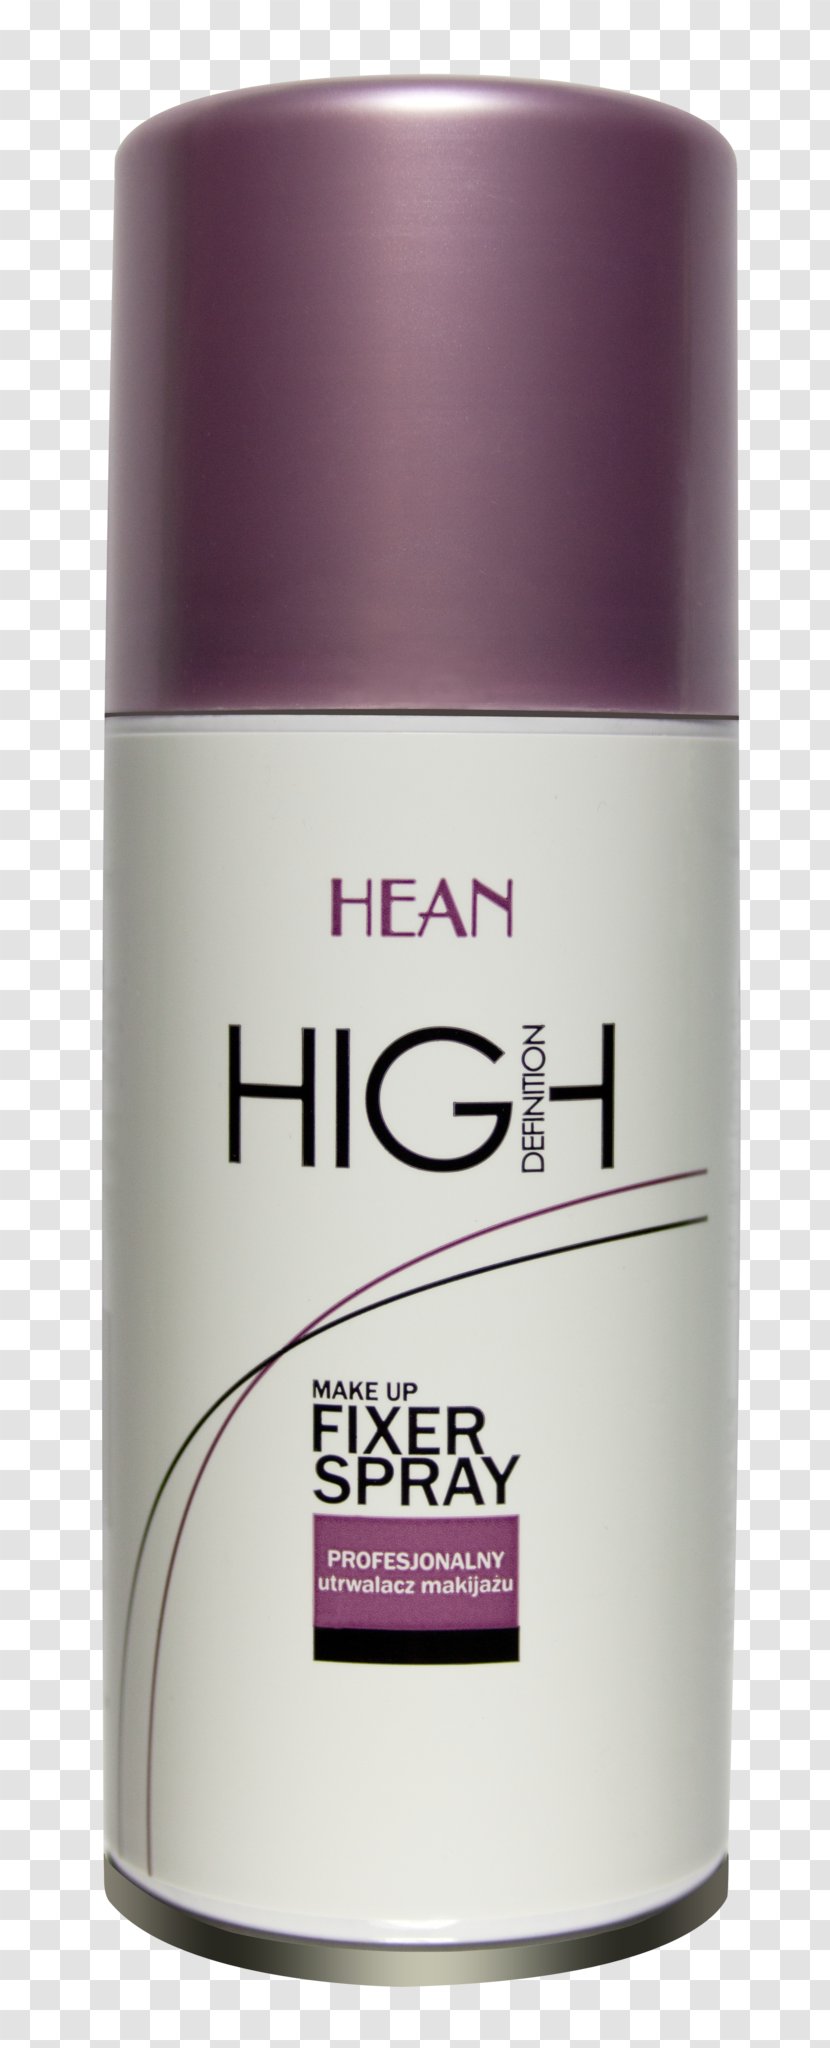 Lotion Cream HEAN HD Make Up Fixer Spray Cosmetics Aerosol - Purple - High Definition Pictures Transparent PNG